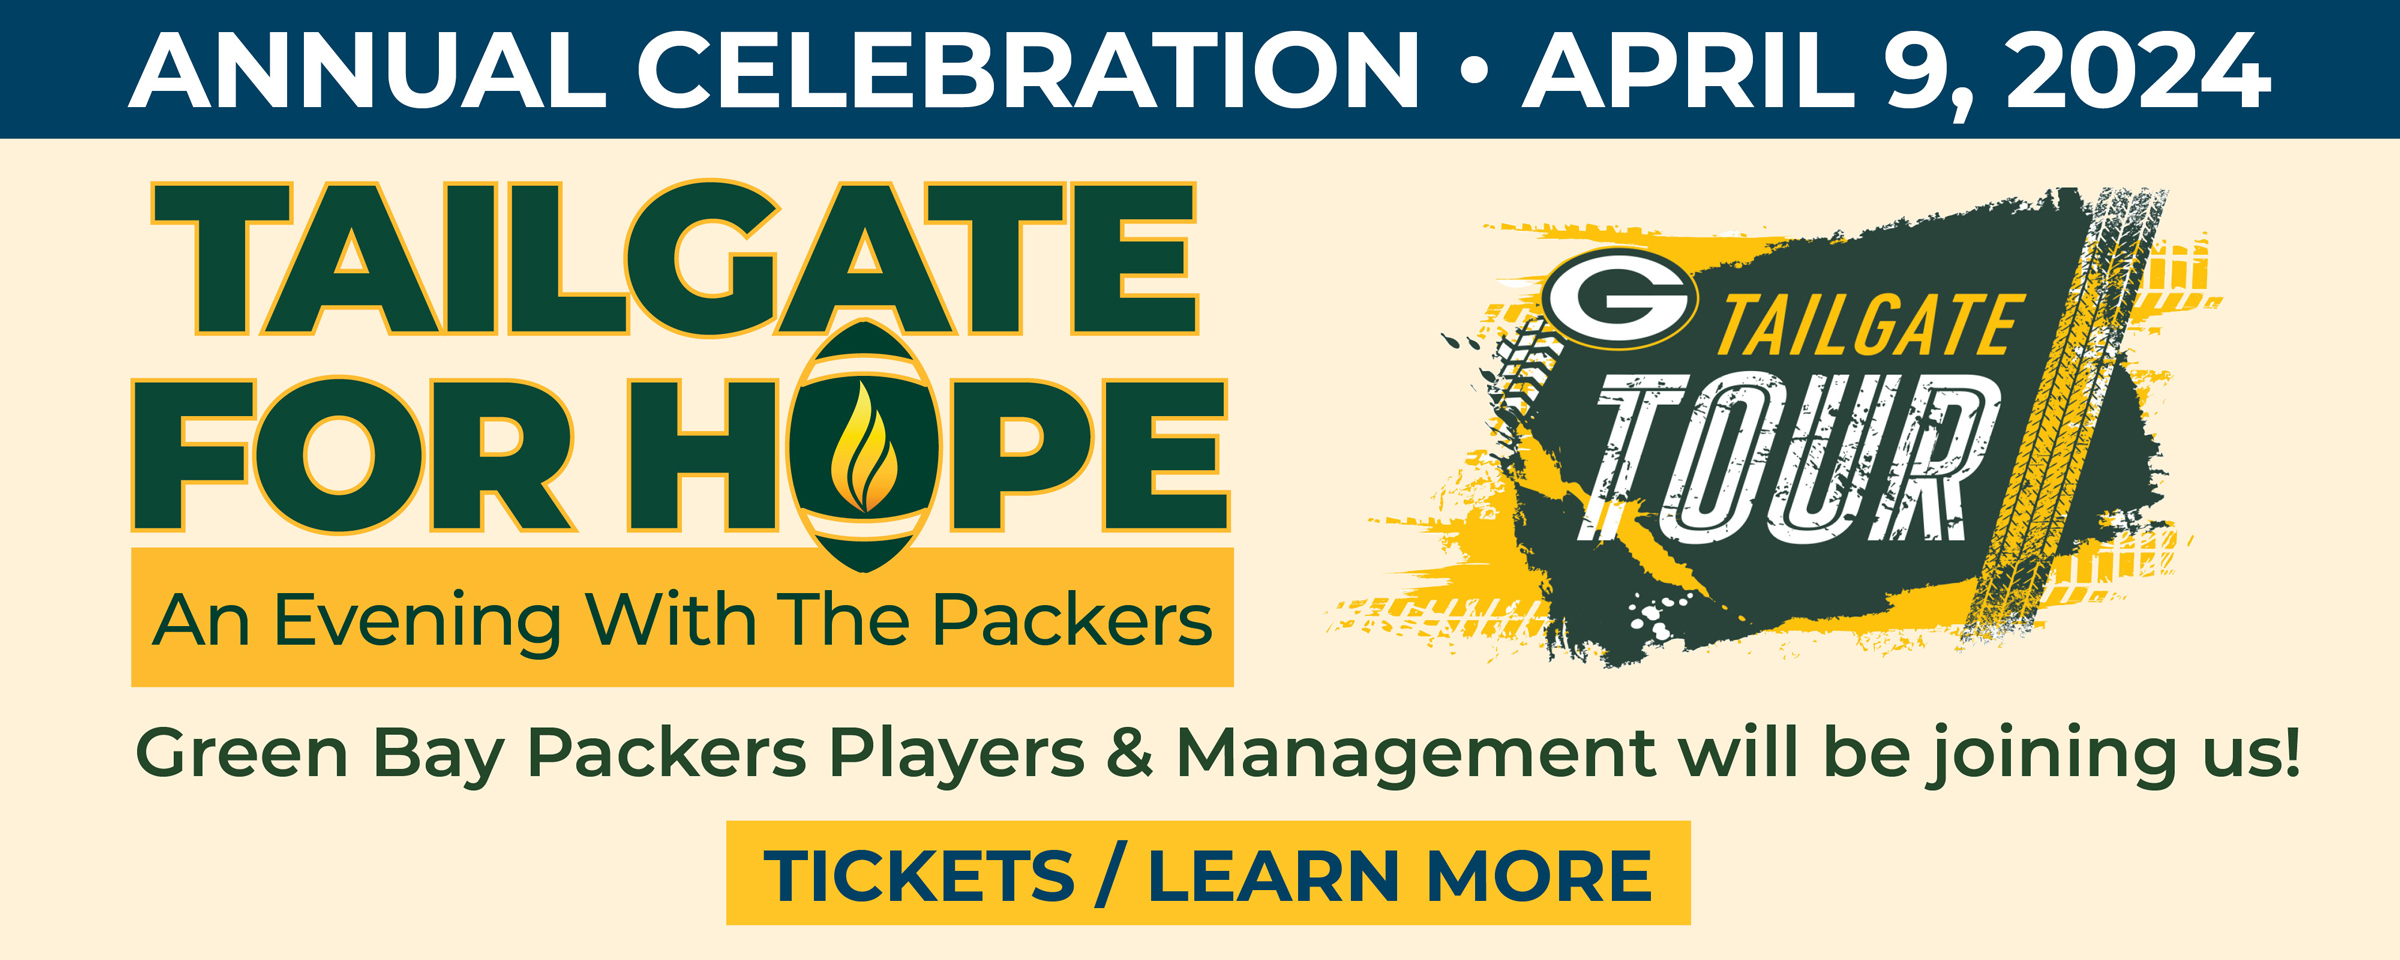 Annual Celebration April 9, 2024 - Tailgate for Hope: An Evening with the Packers